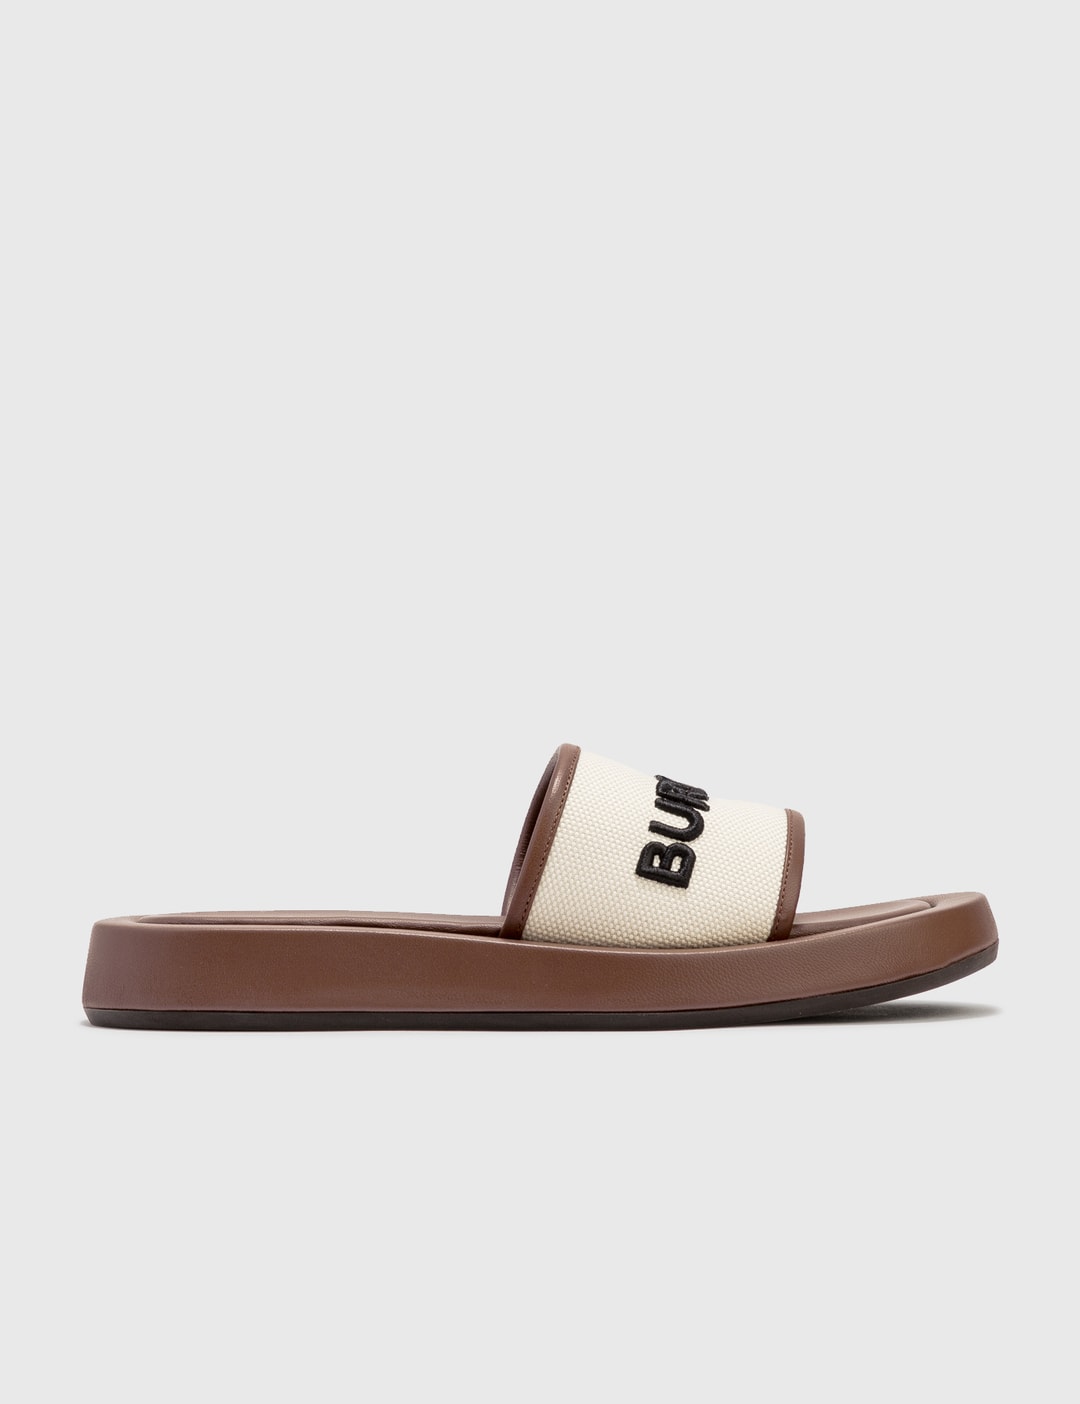 Burberry - Buckingham Slide | HBX - Globally Curated Fashion and Lifestyle  by Hypebeast